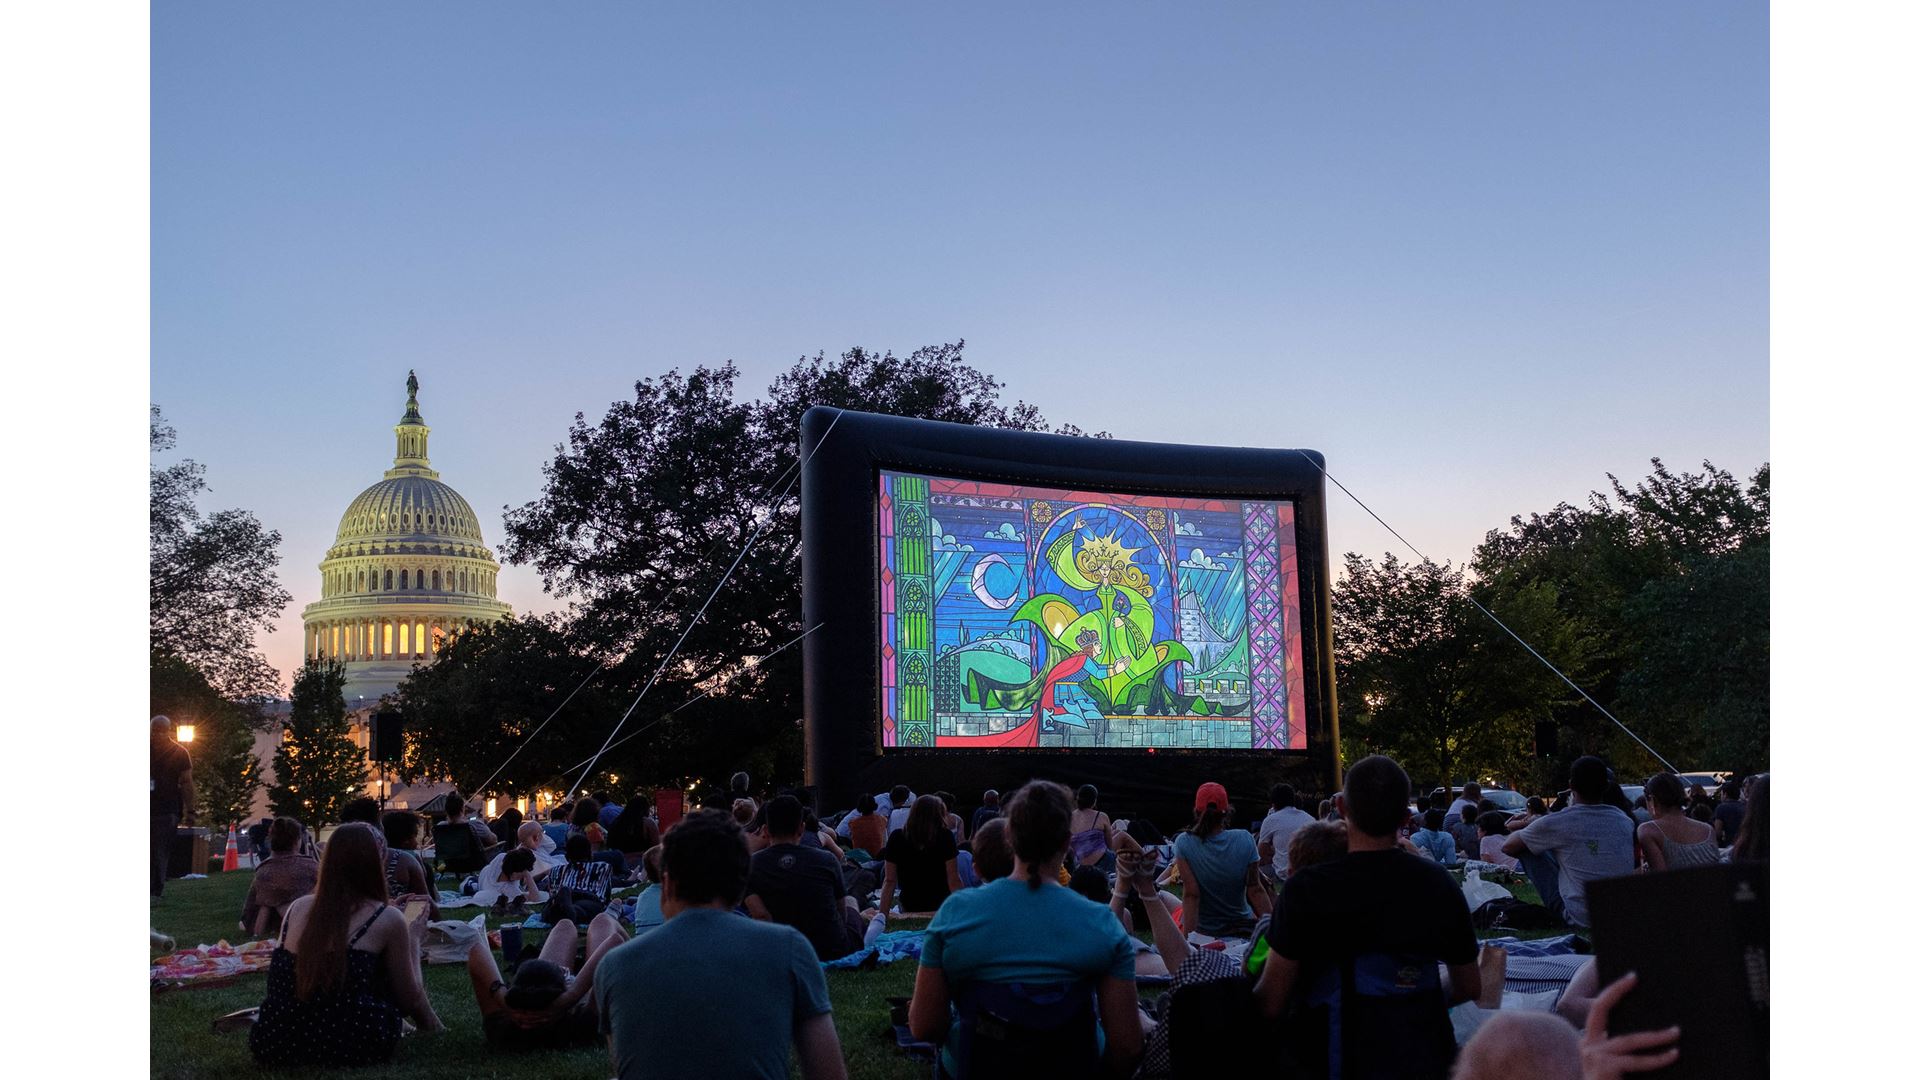 Summer Movies on the Lawn